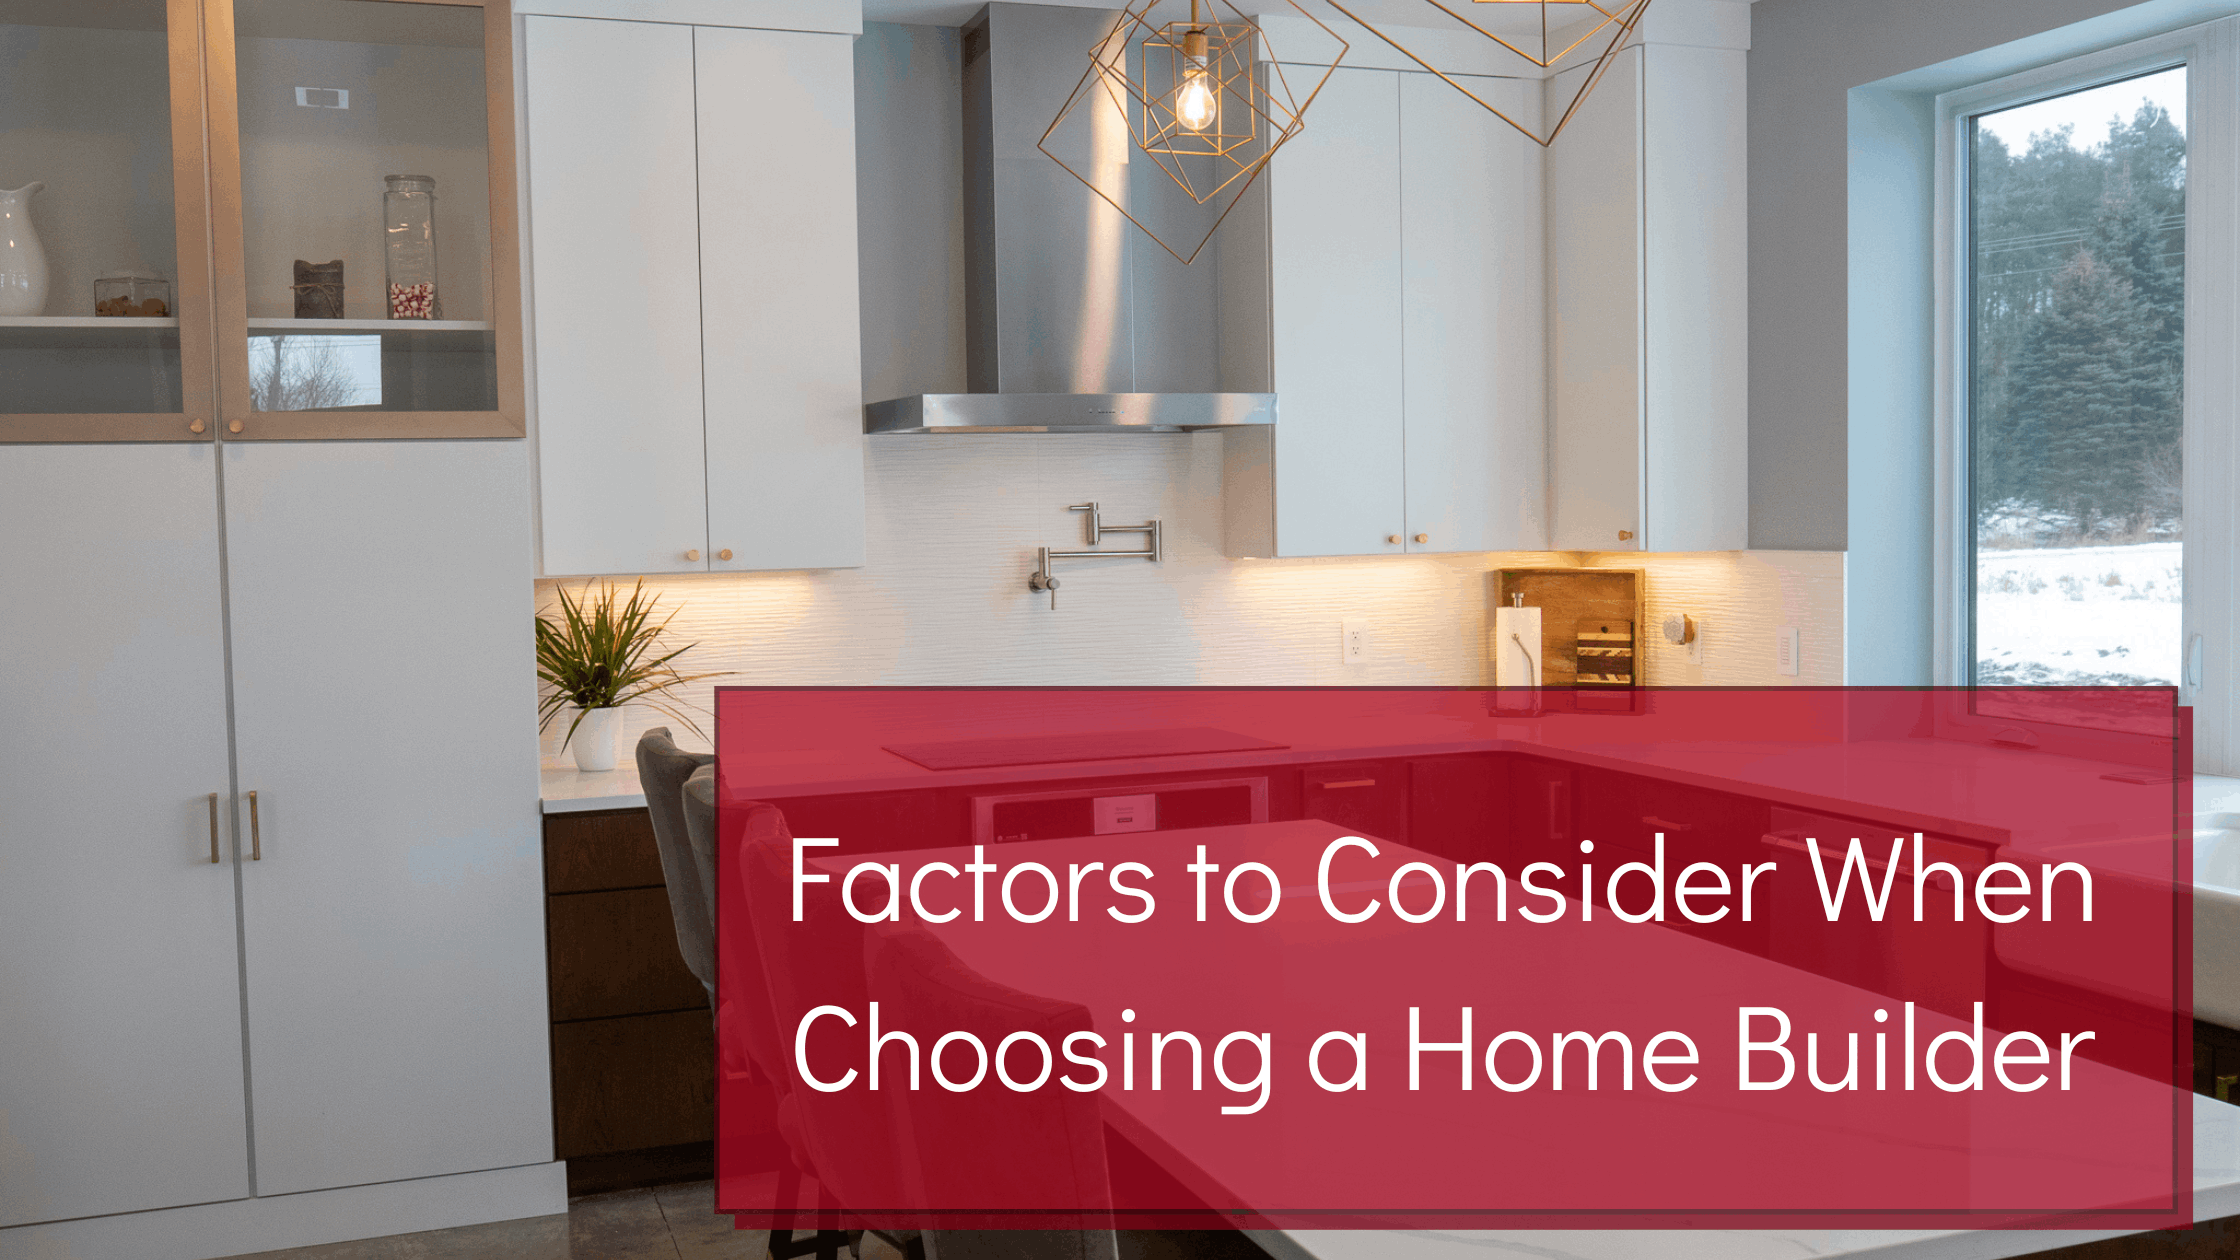 Factors to Consider when Choosing a Home Builder